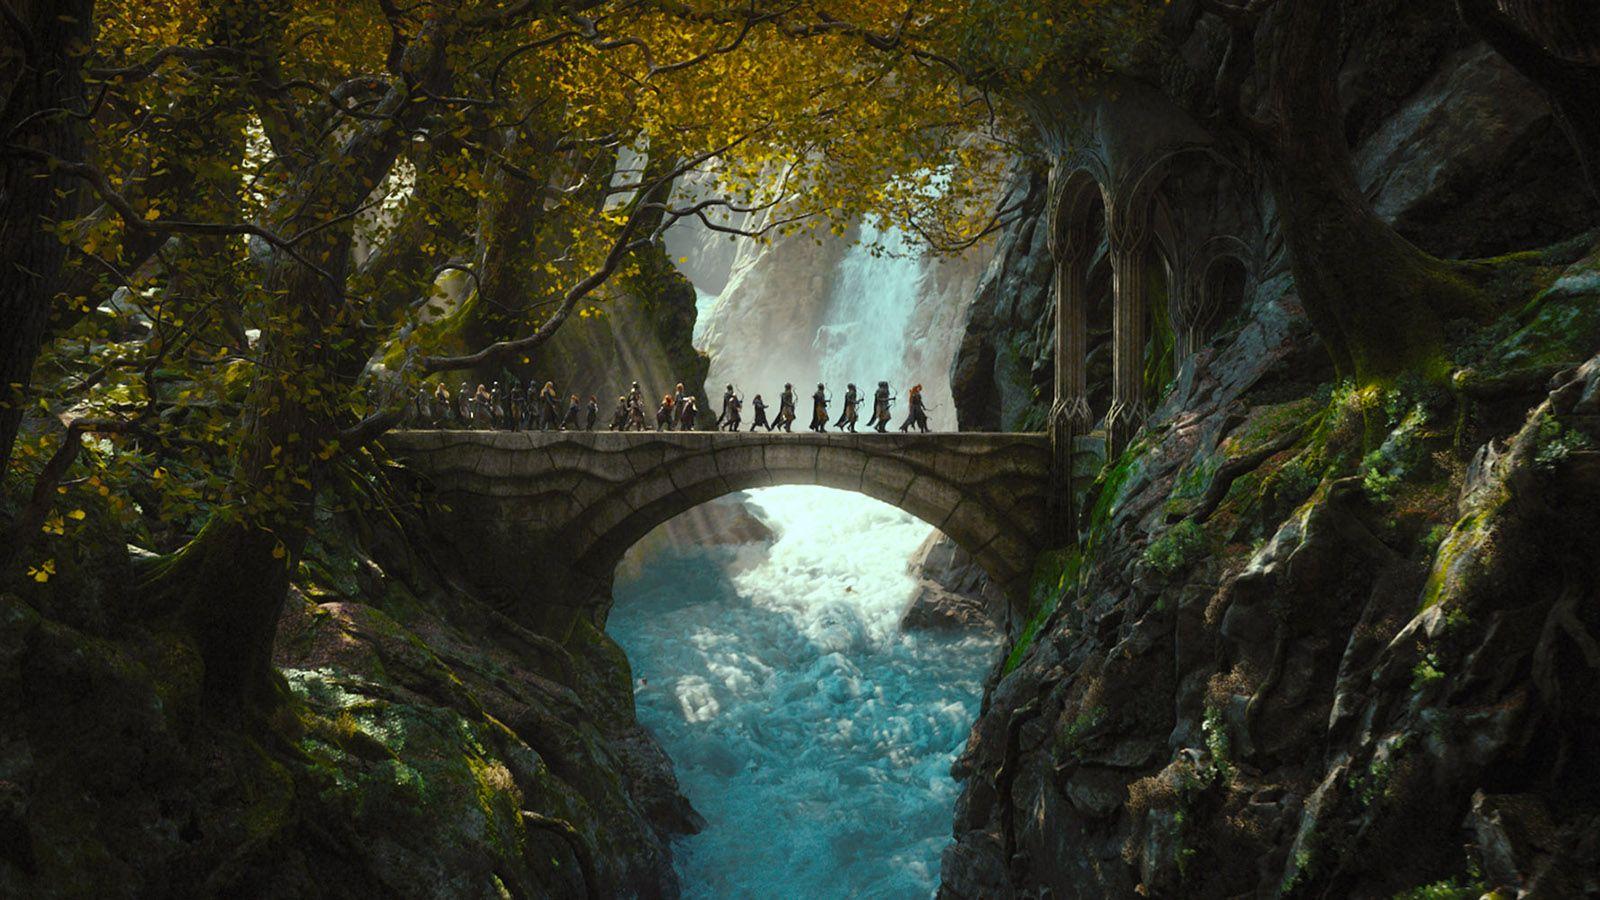 Lord of the Rings Landscape Wallpapers - Top Free Lord of the Rings